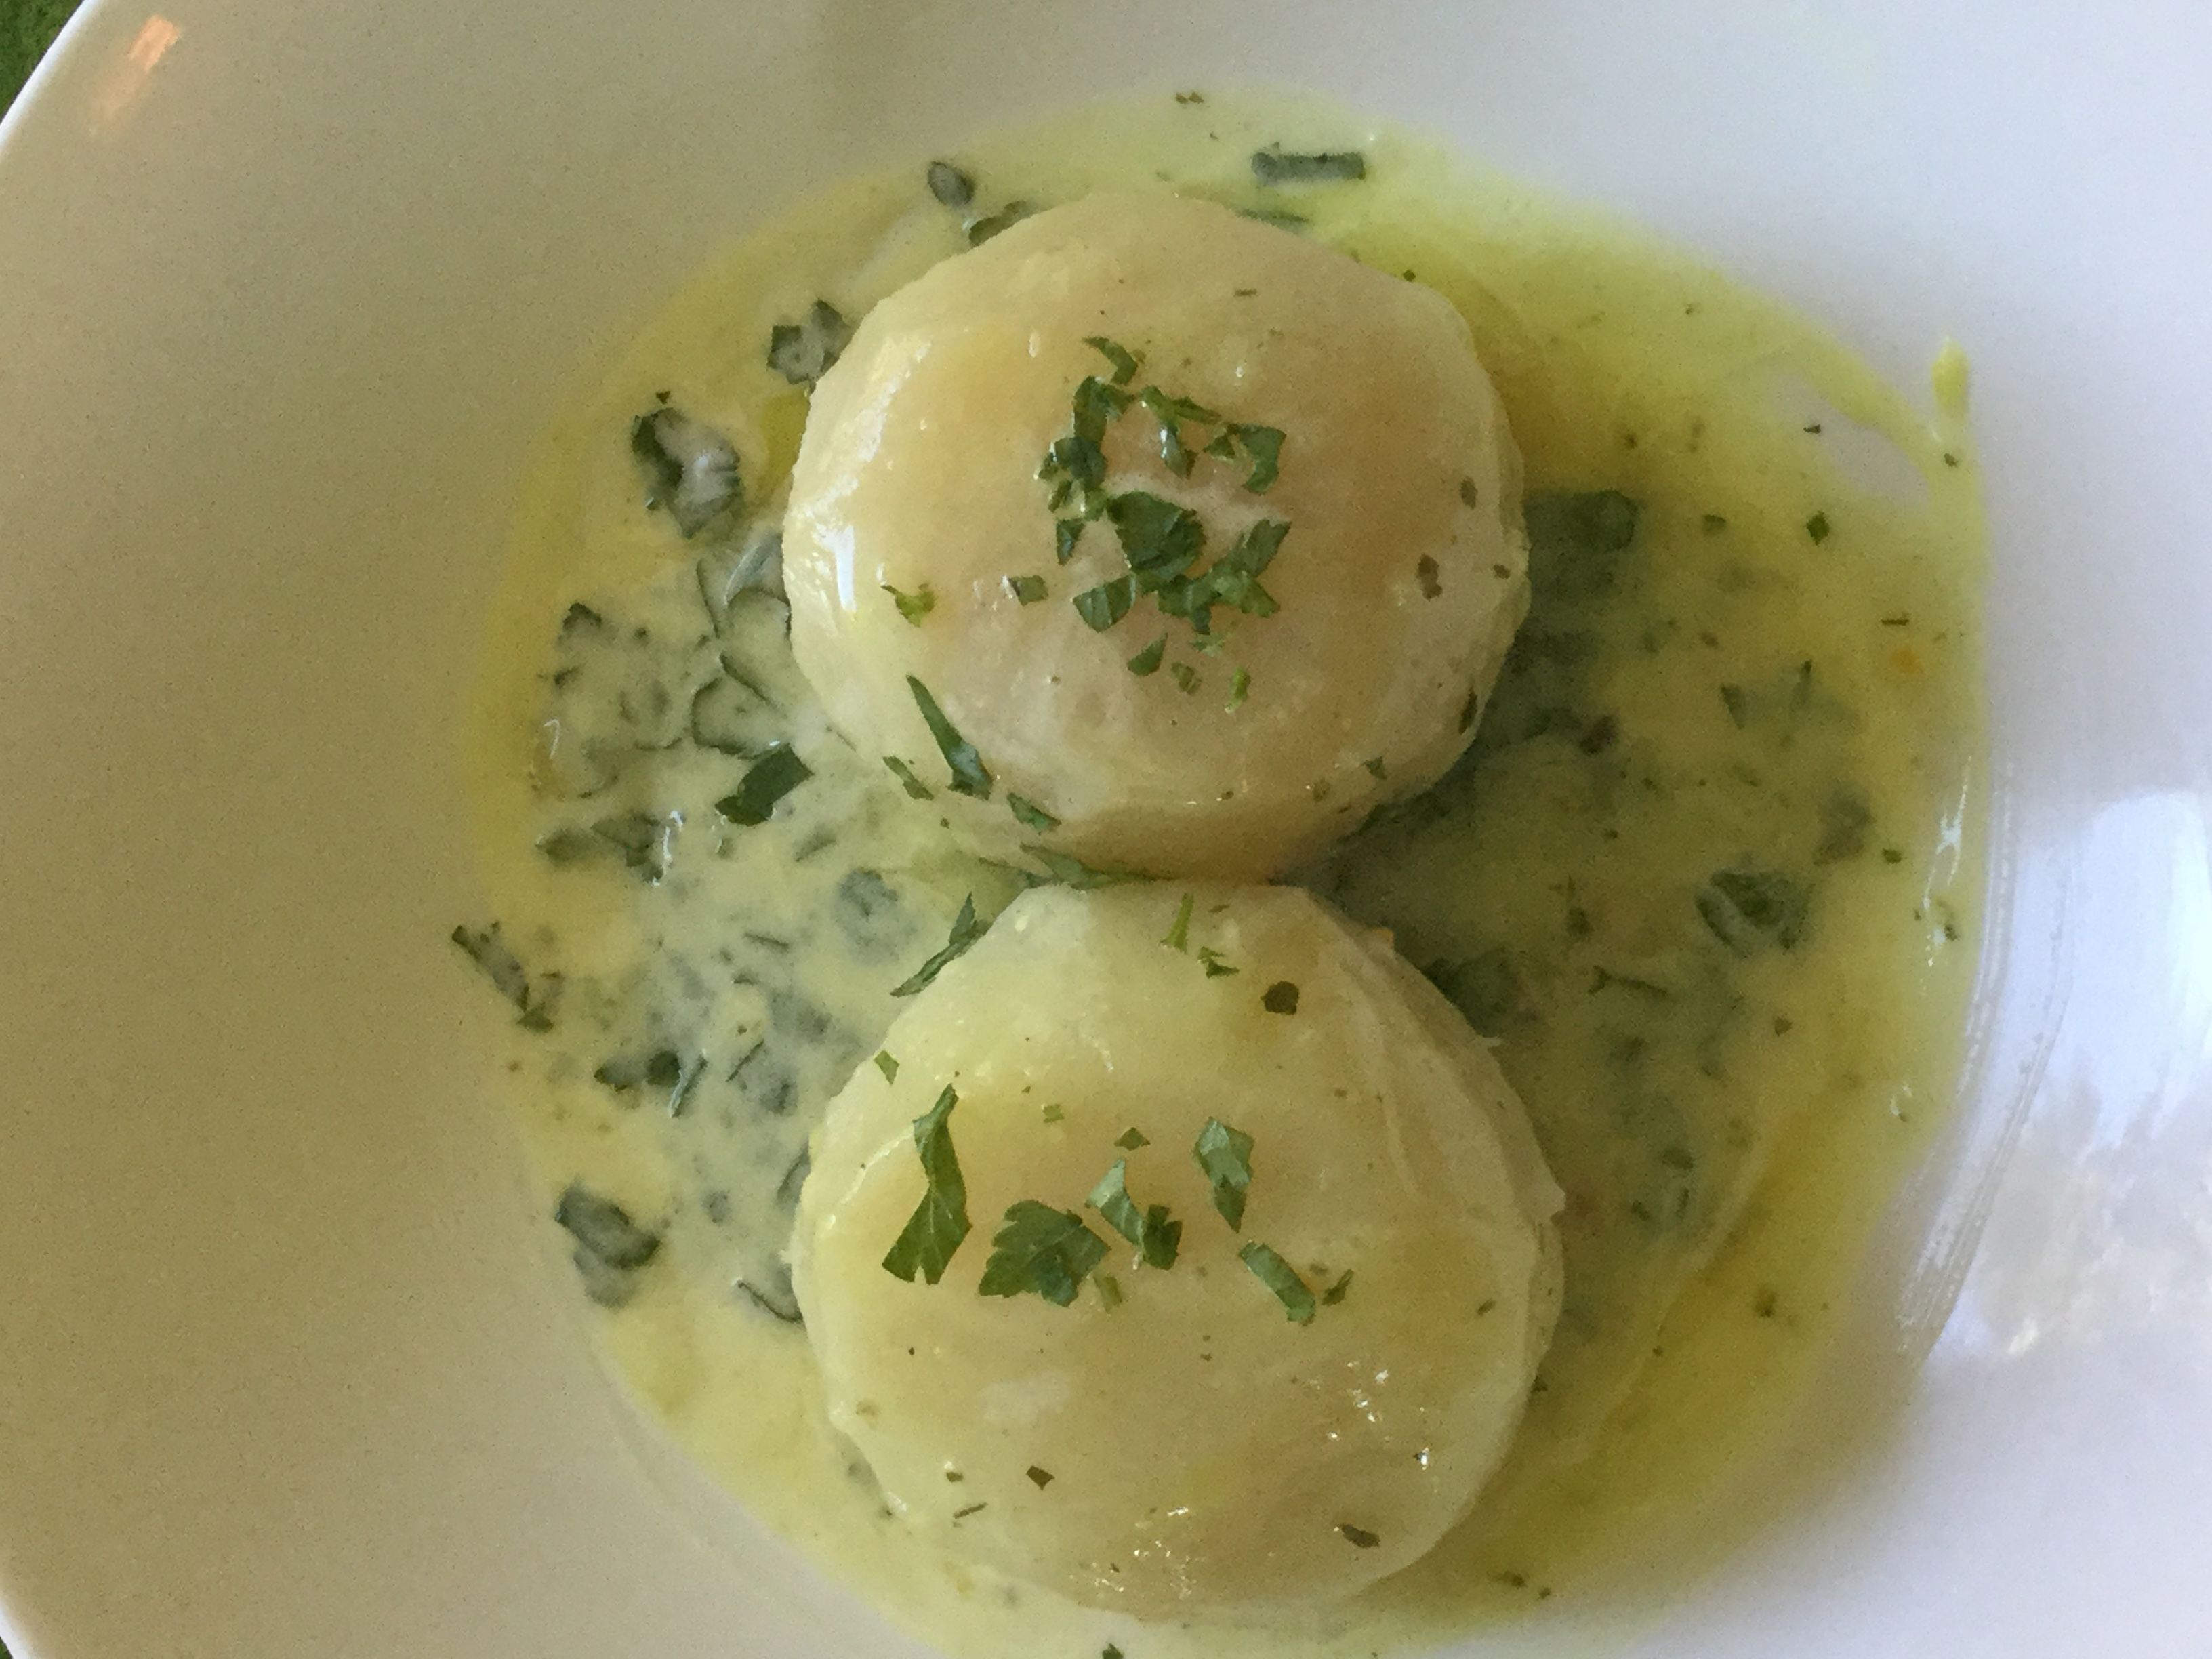 <p>Steamed kohlrabi served with a light yet creamy parsley sauce. Reviewer Mina Y loved this recipe: "Excellent exactly as written! Thanks for the tip about using the smaller kohlrabi- being unfamiliar than them, I would have probably brought home the biggest I could find!"</p>
                          